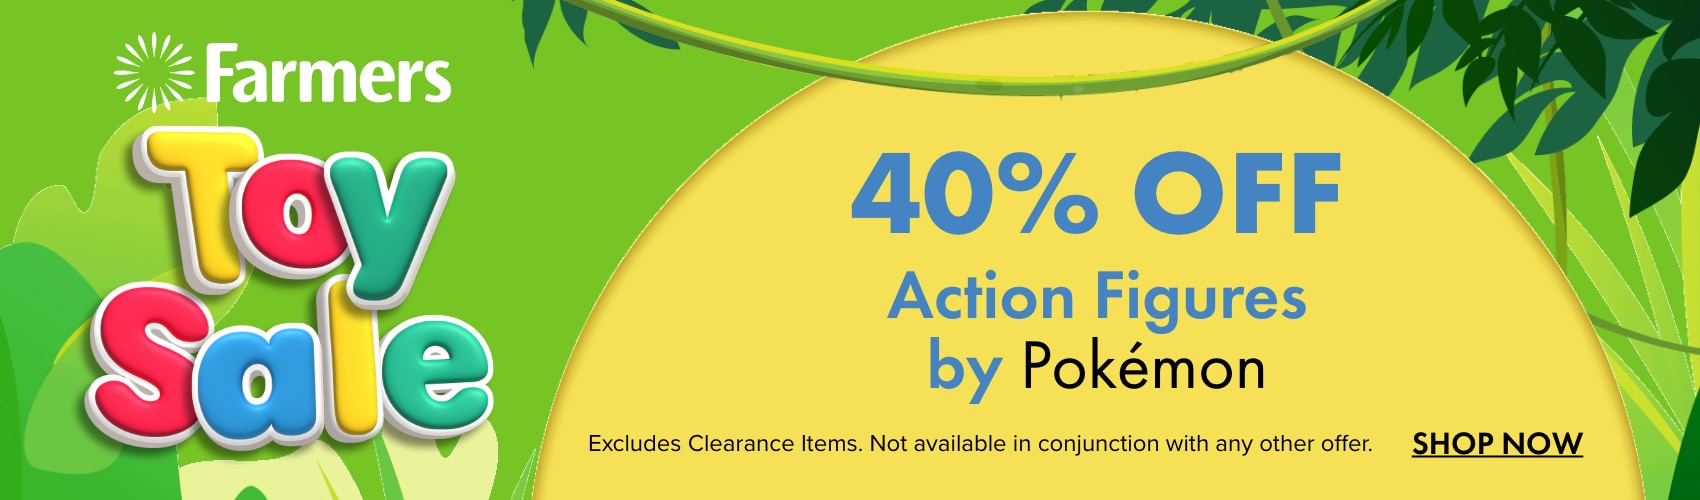 40% OFF Action Figures by Pokemon